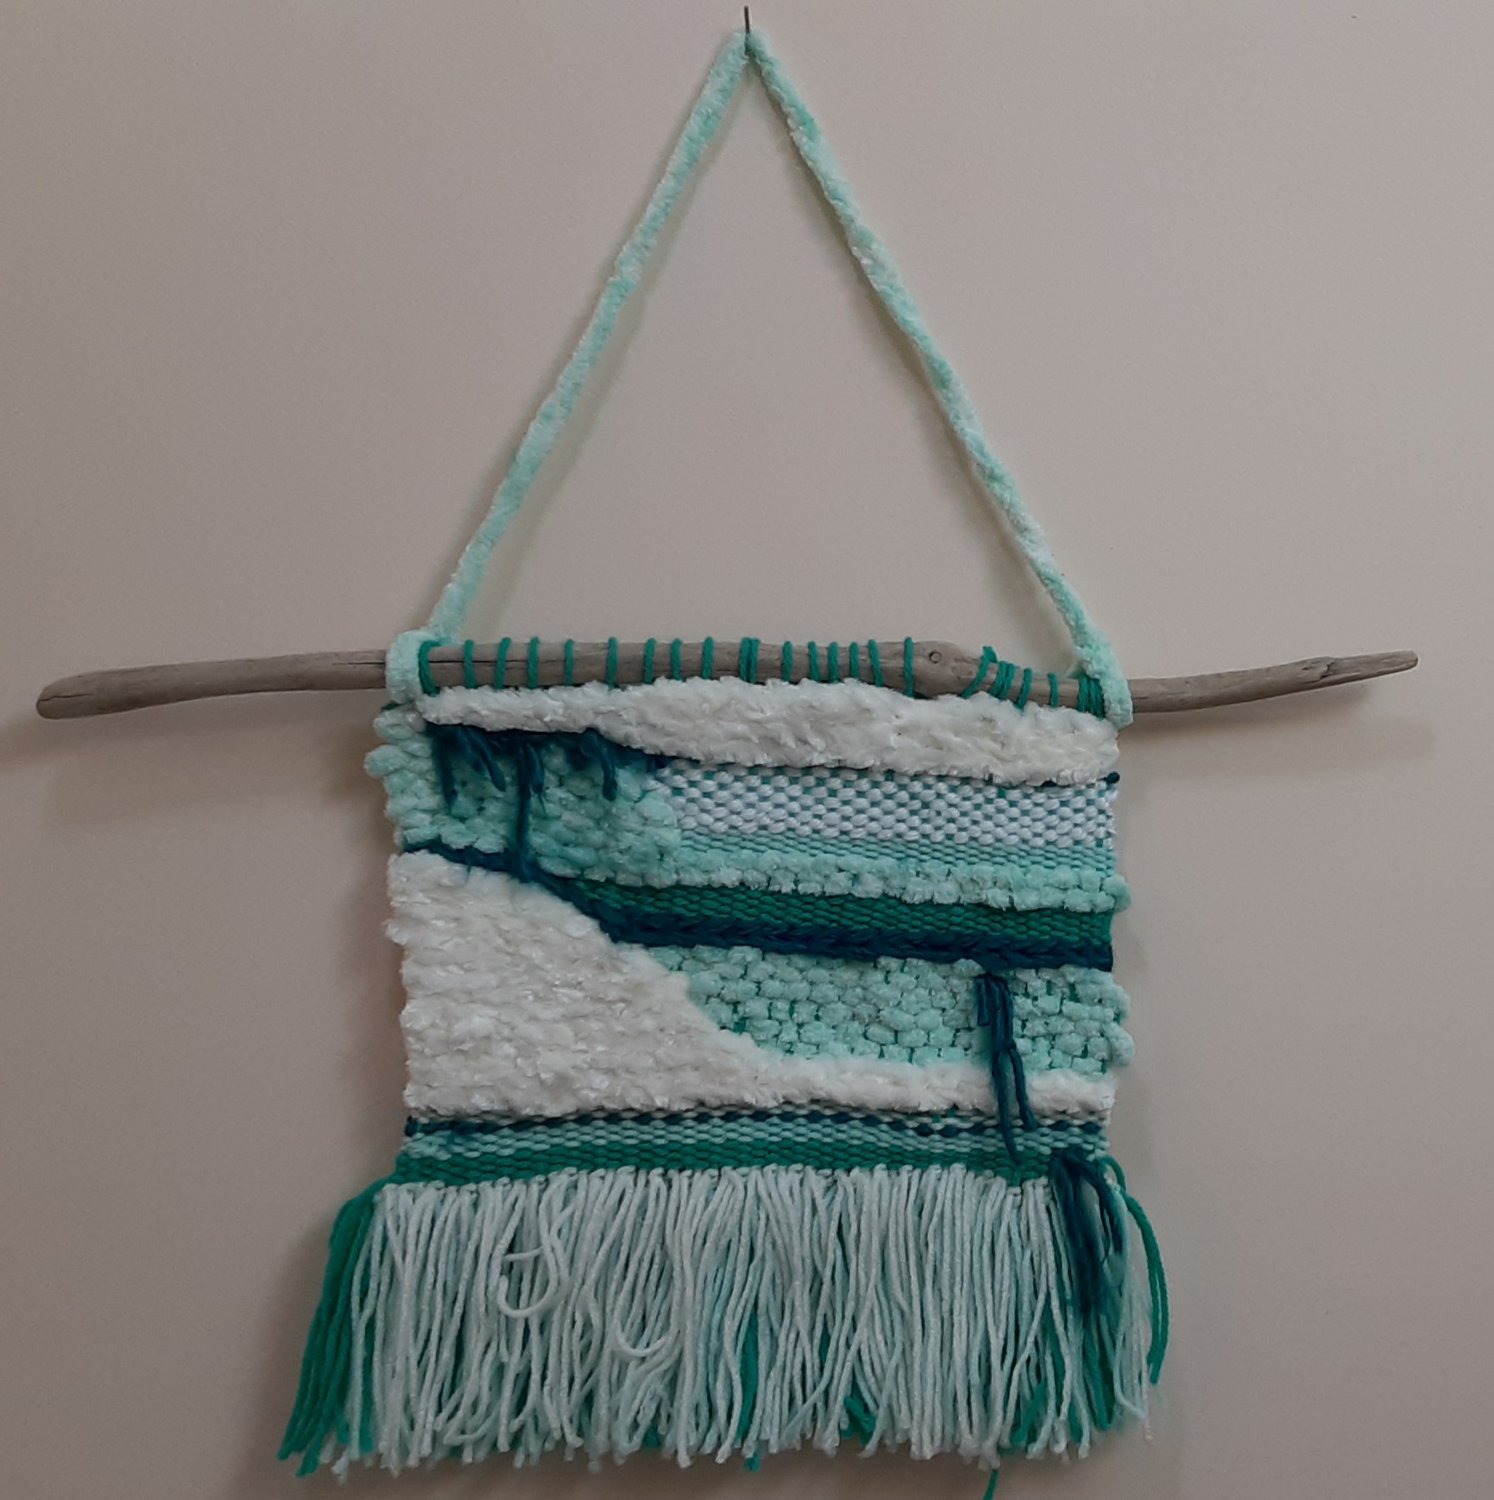 The first class at the newly relocated Athens Arts Gallery is "Weaving Without a Loom" and  is June 9. There are two sessions to choose from — an afternoon session (1-3 p.m.) or an evening session (6-8 p.m.). Classes are open to anyone 14 years and older. The cost of $35 covers all materials and supplies.